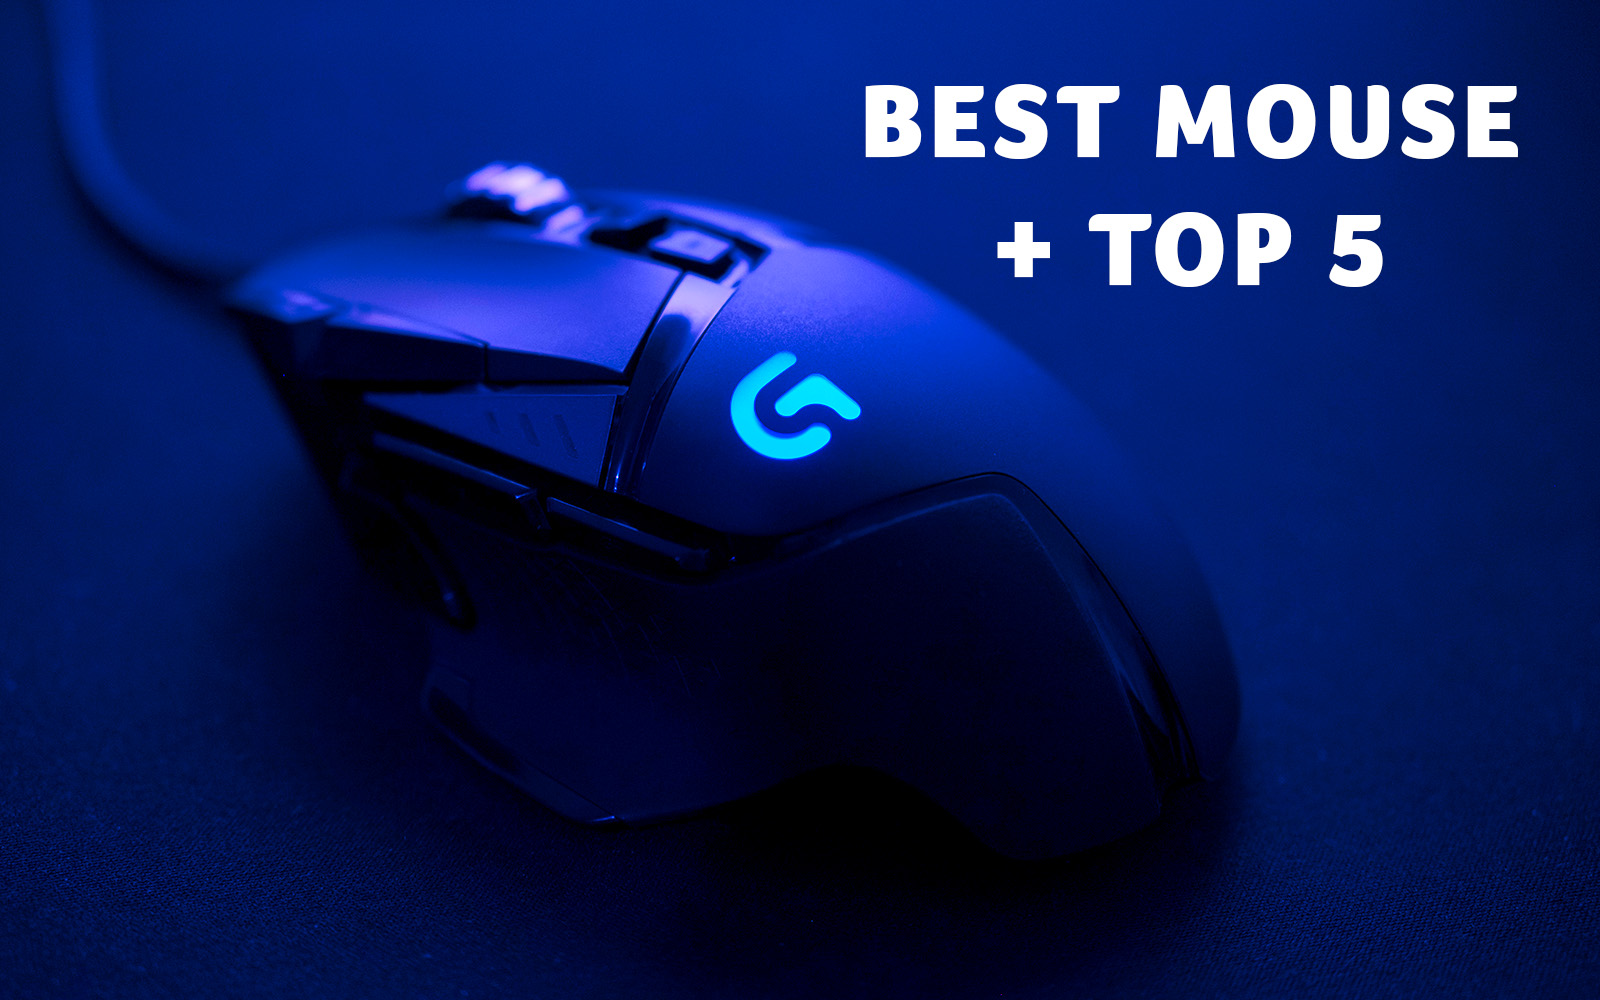 BEST MOUSE FOR PHOTOSHOP